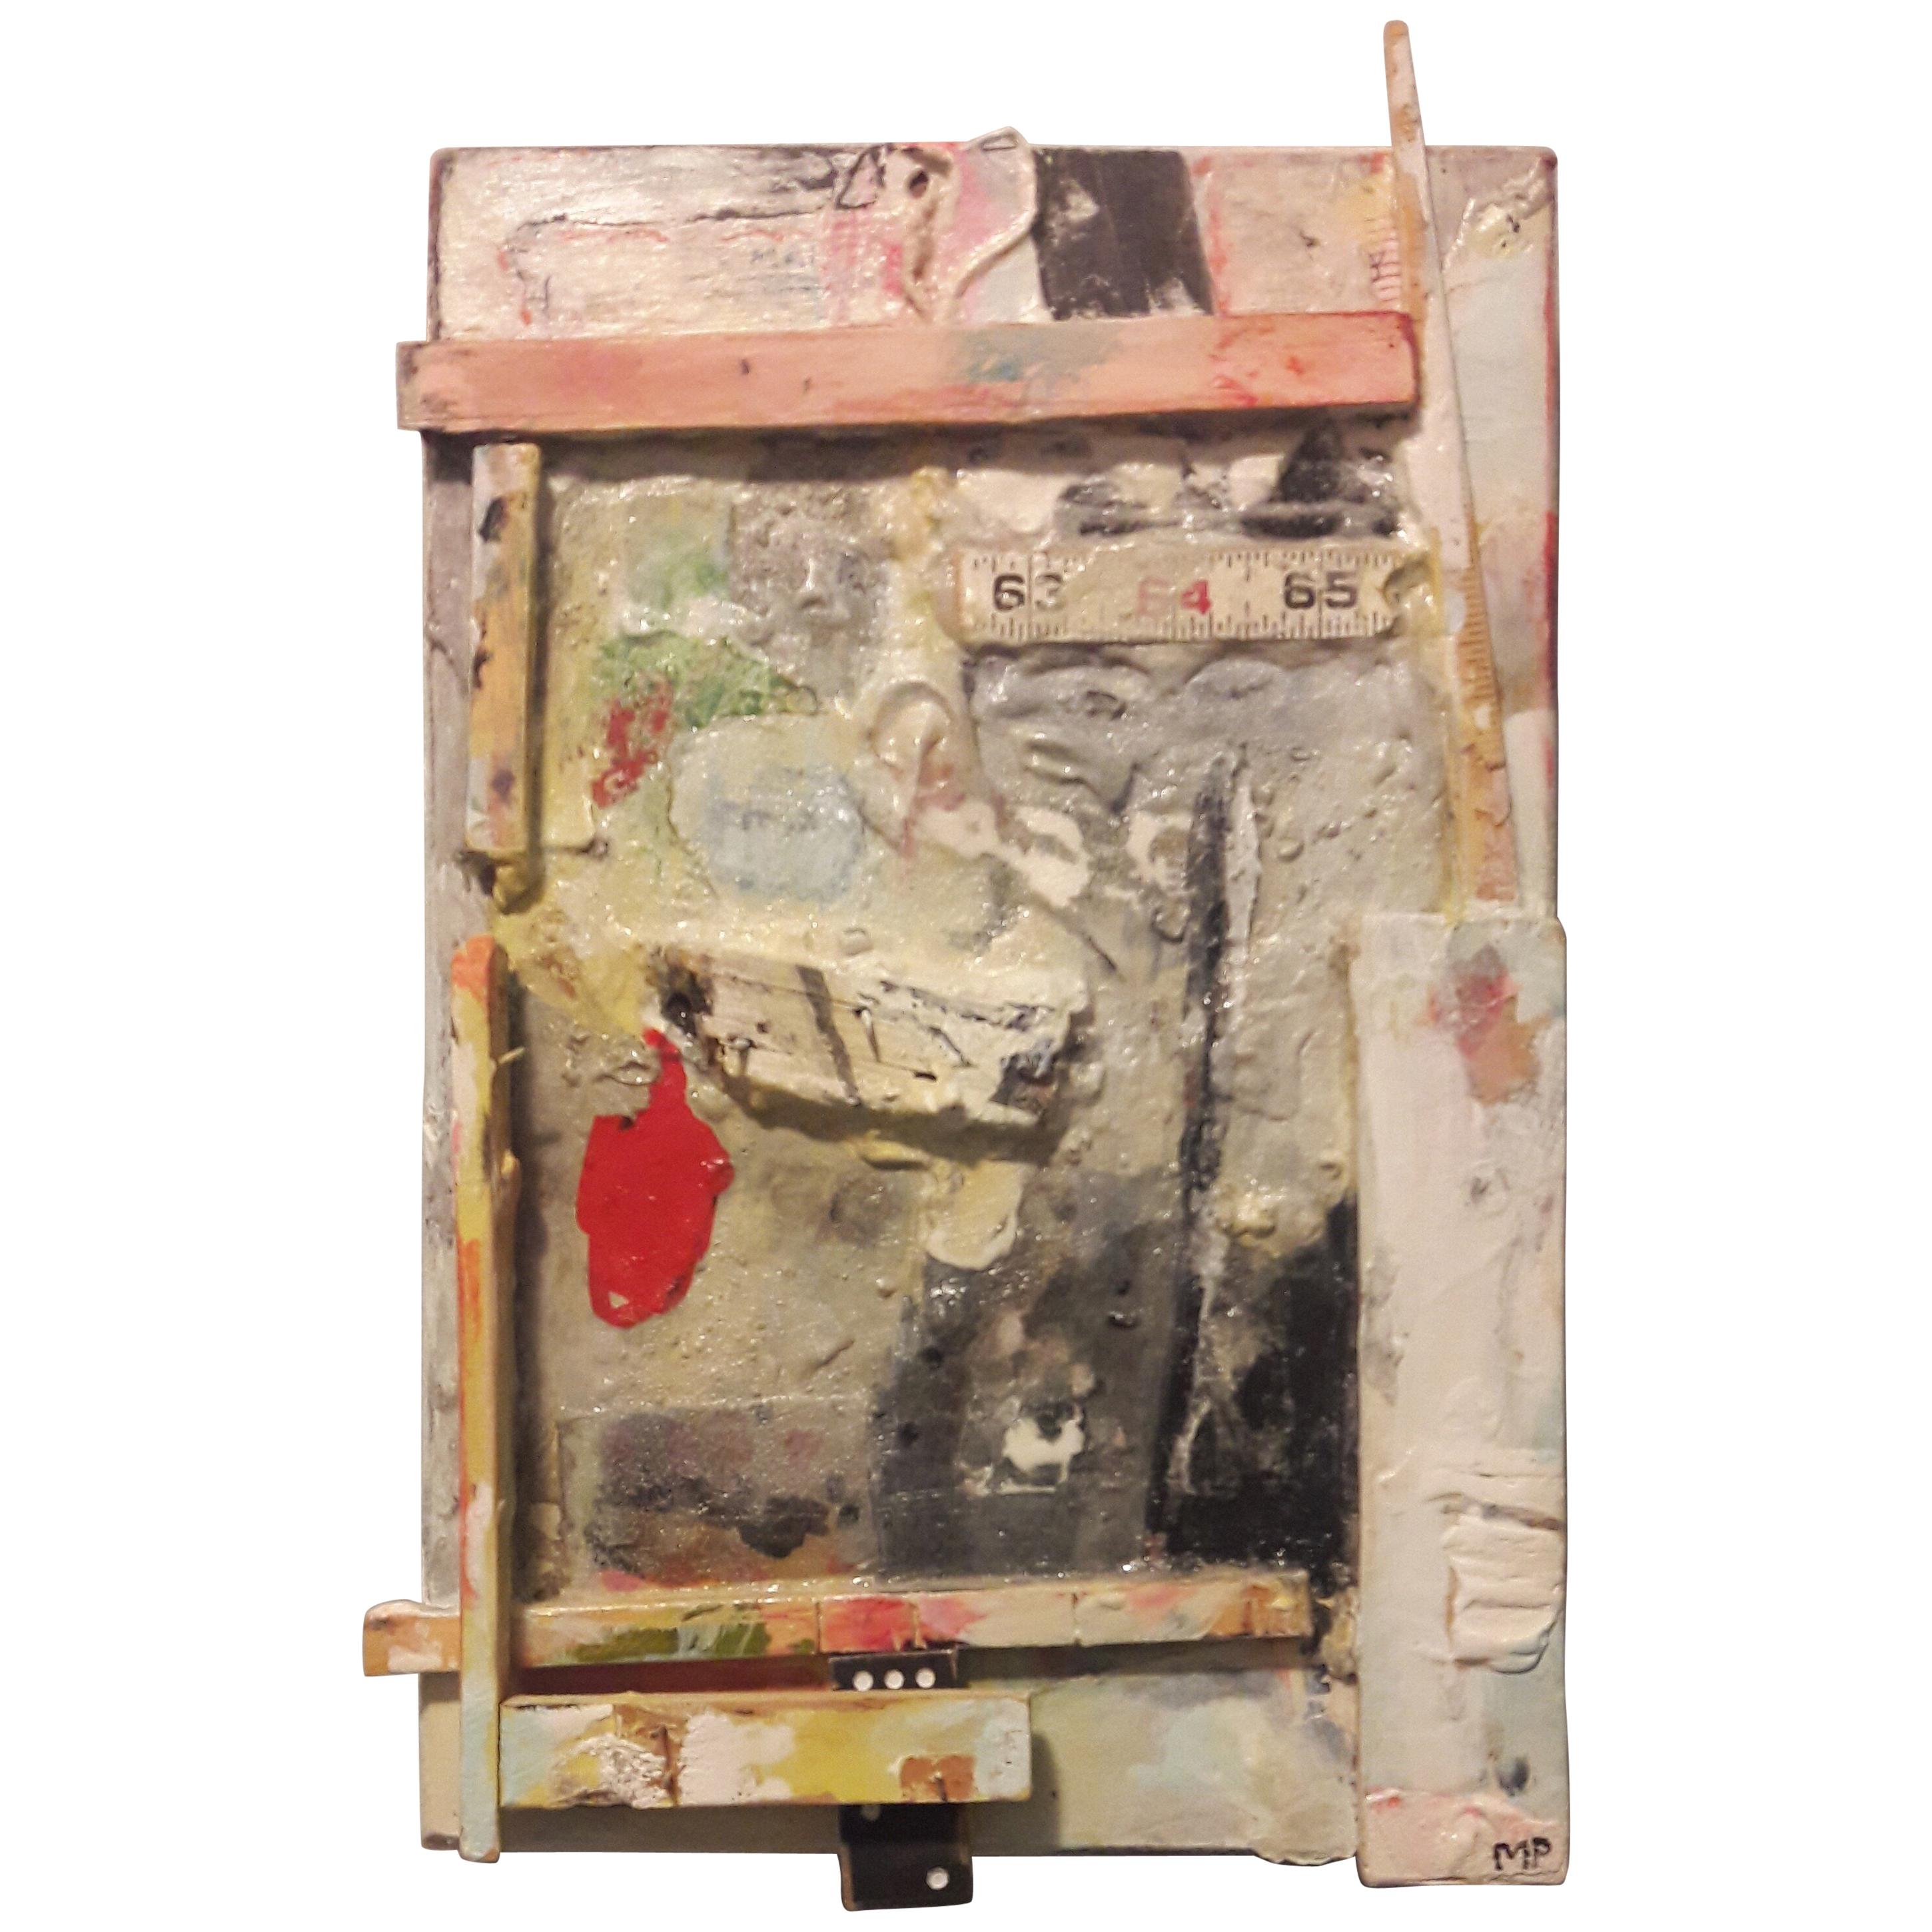 Mark Palmer Construction #2 2018, Acrylic / Found Objects on Wood For Sale